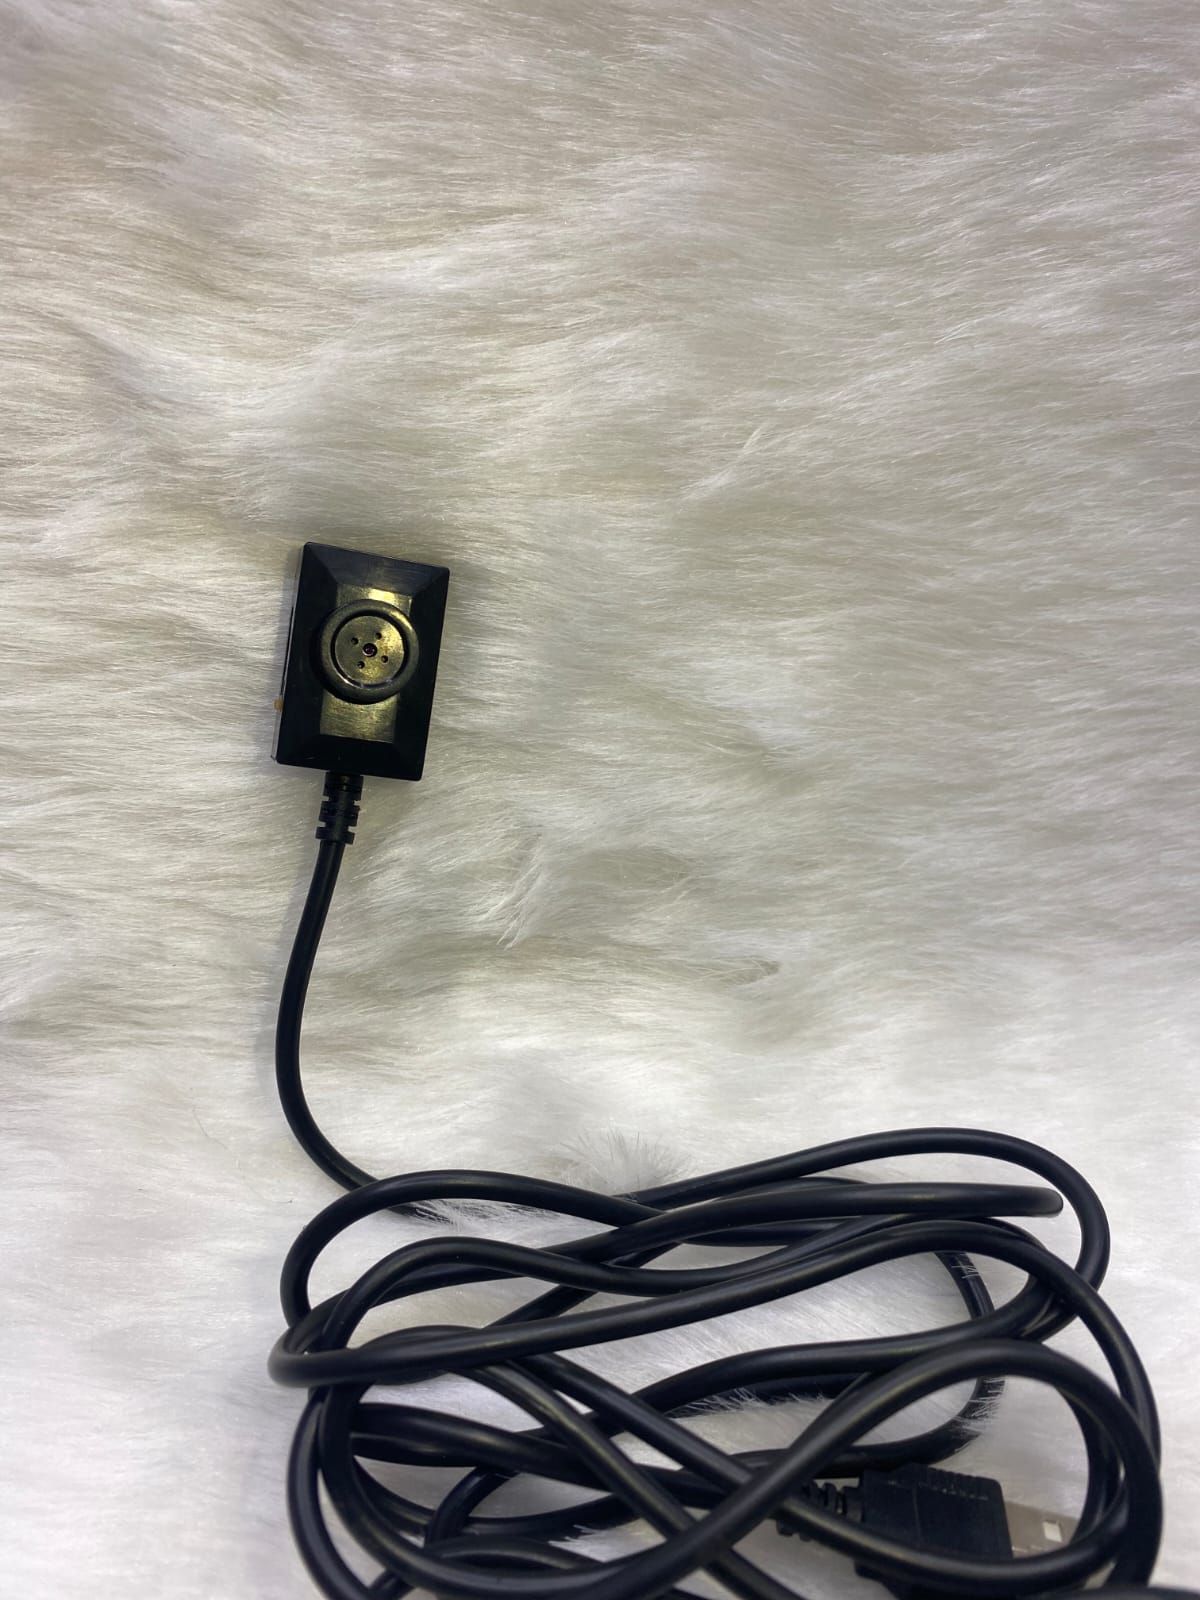 Spy wired button camera - spyhub.in